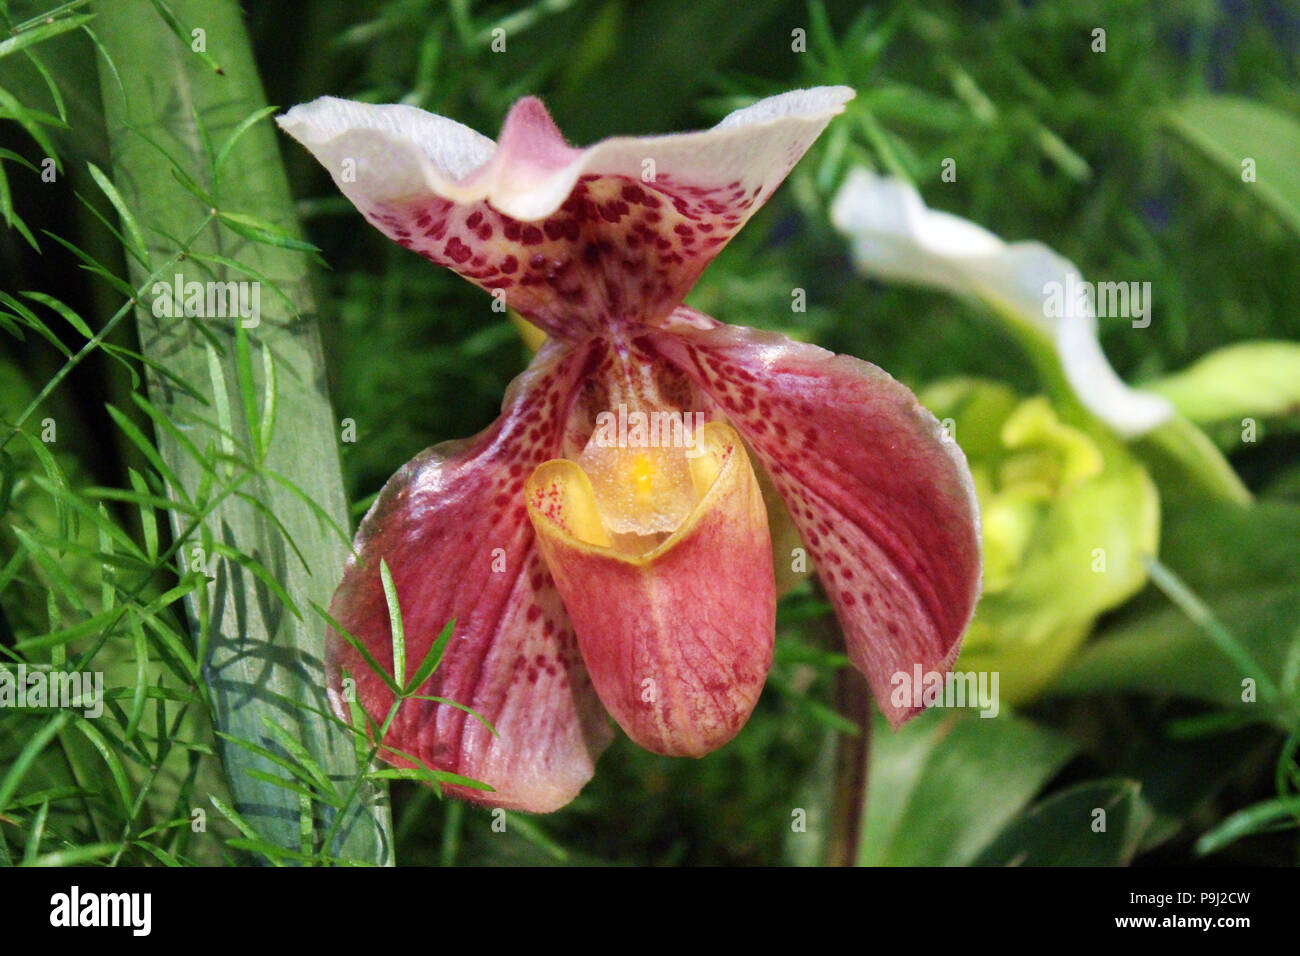 Close up of a maroon, yellow and white Lady's Slipper Orchid in full bloom Stock Photo